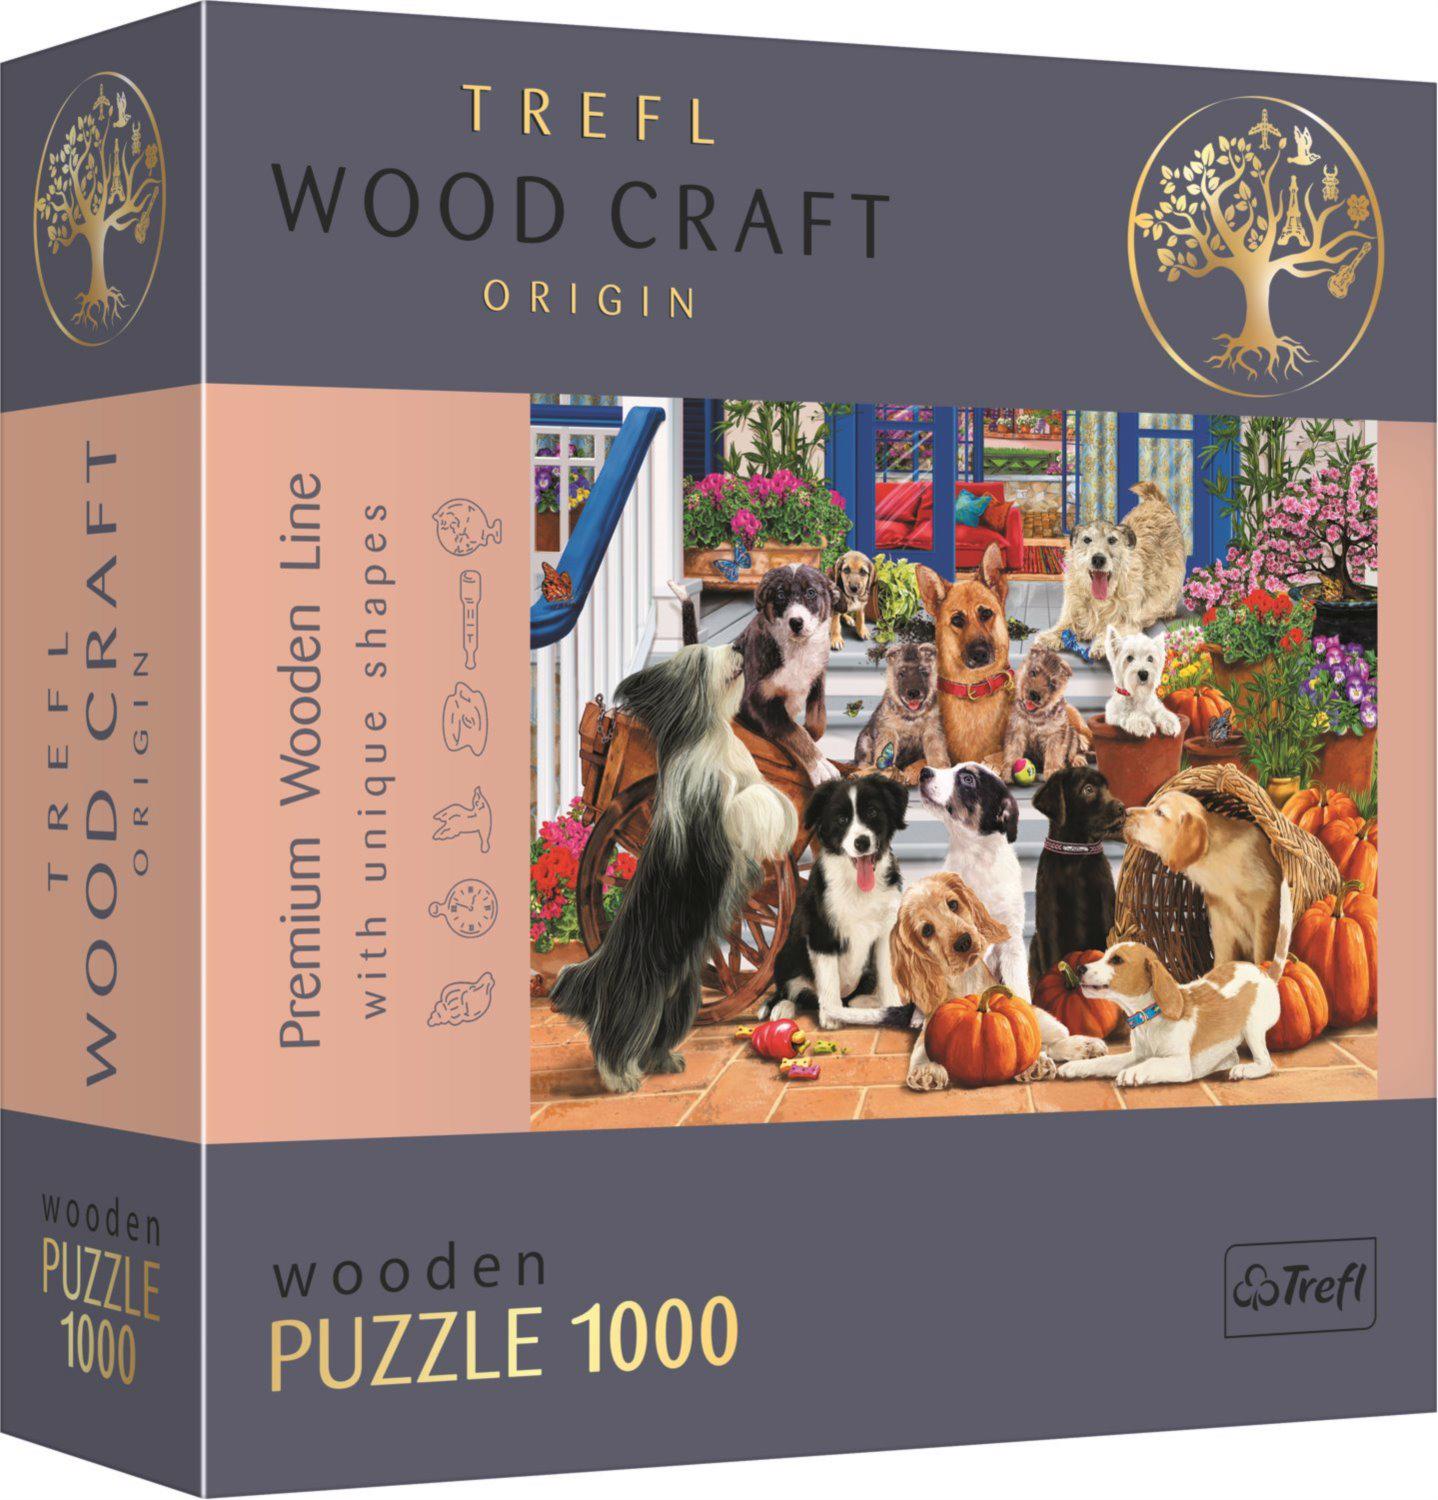 Puzzle Doggy friendship wooden